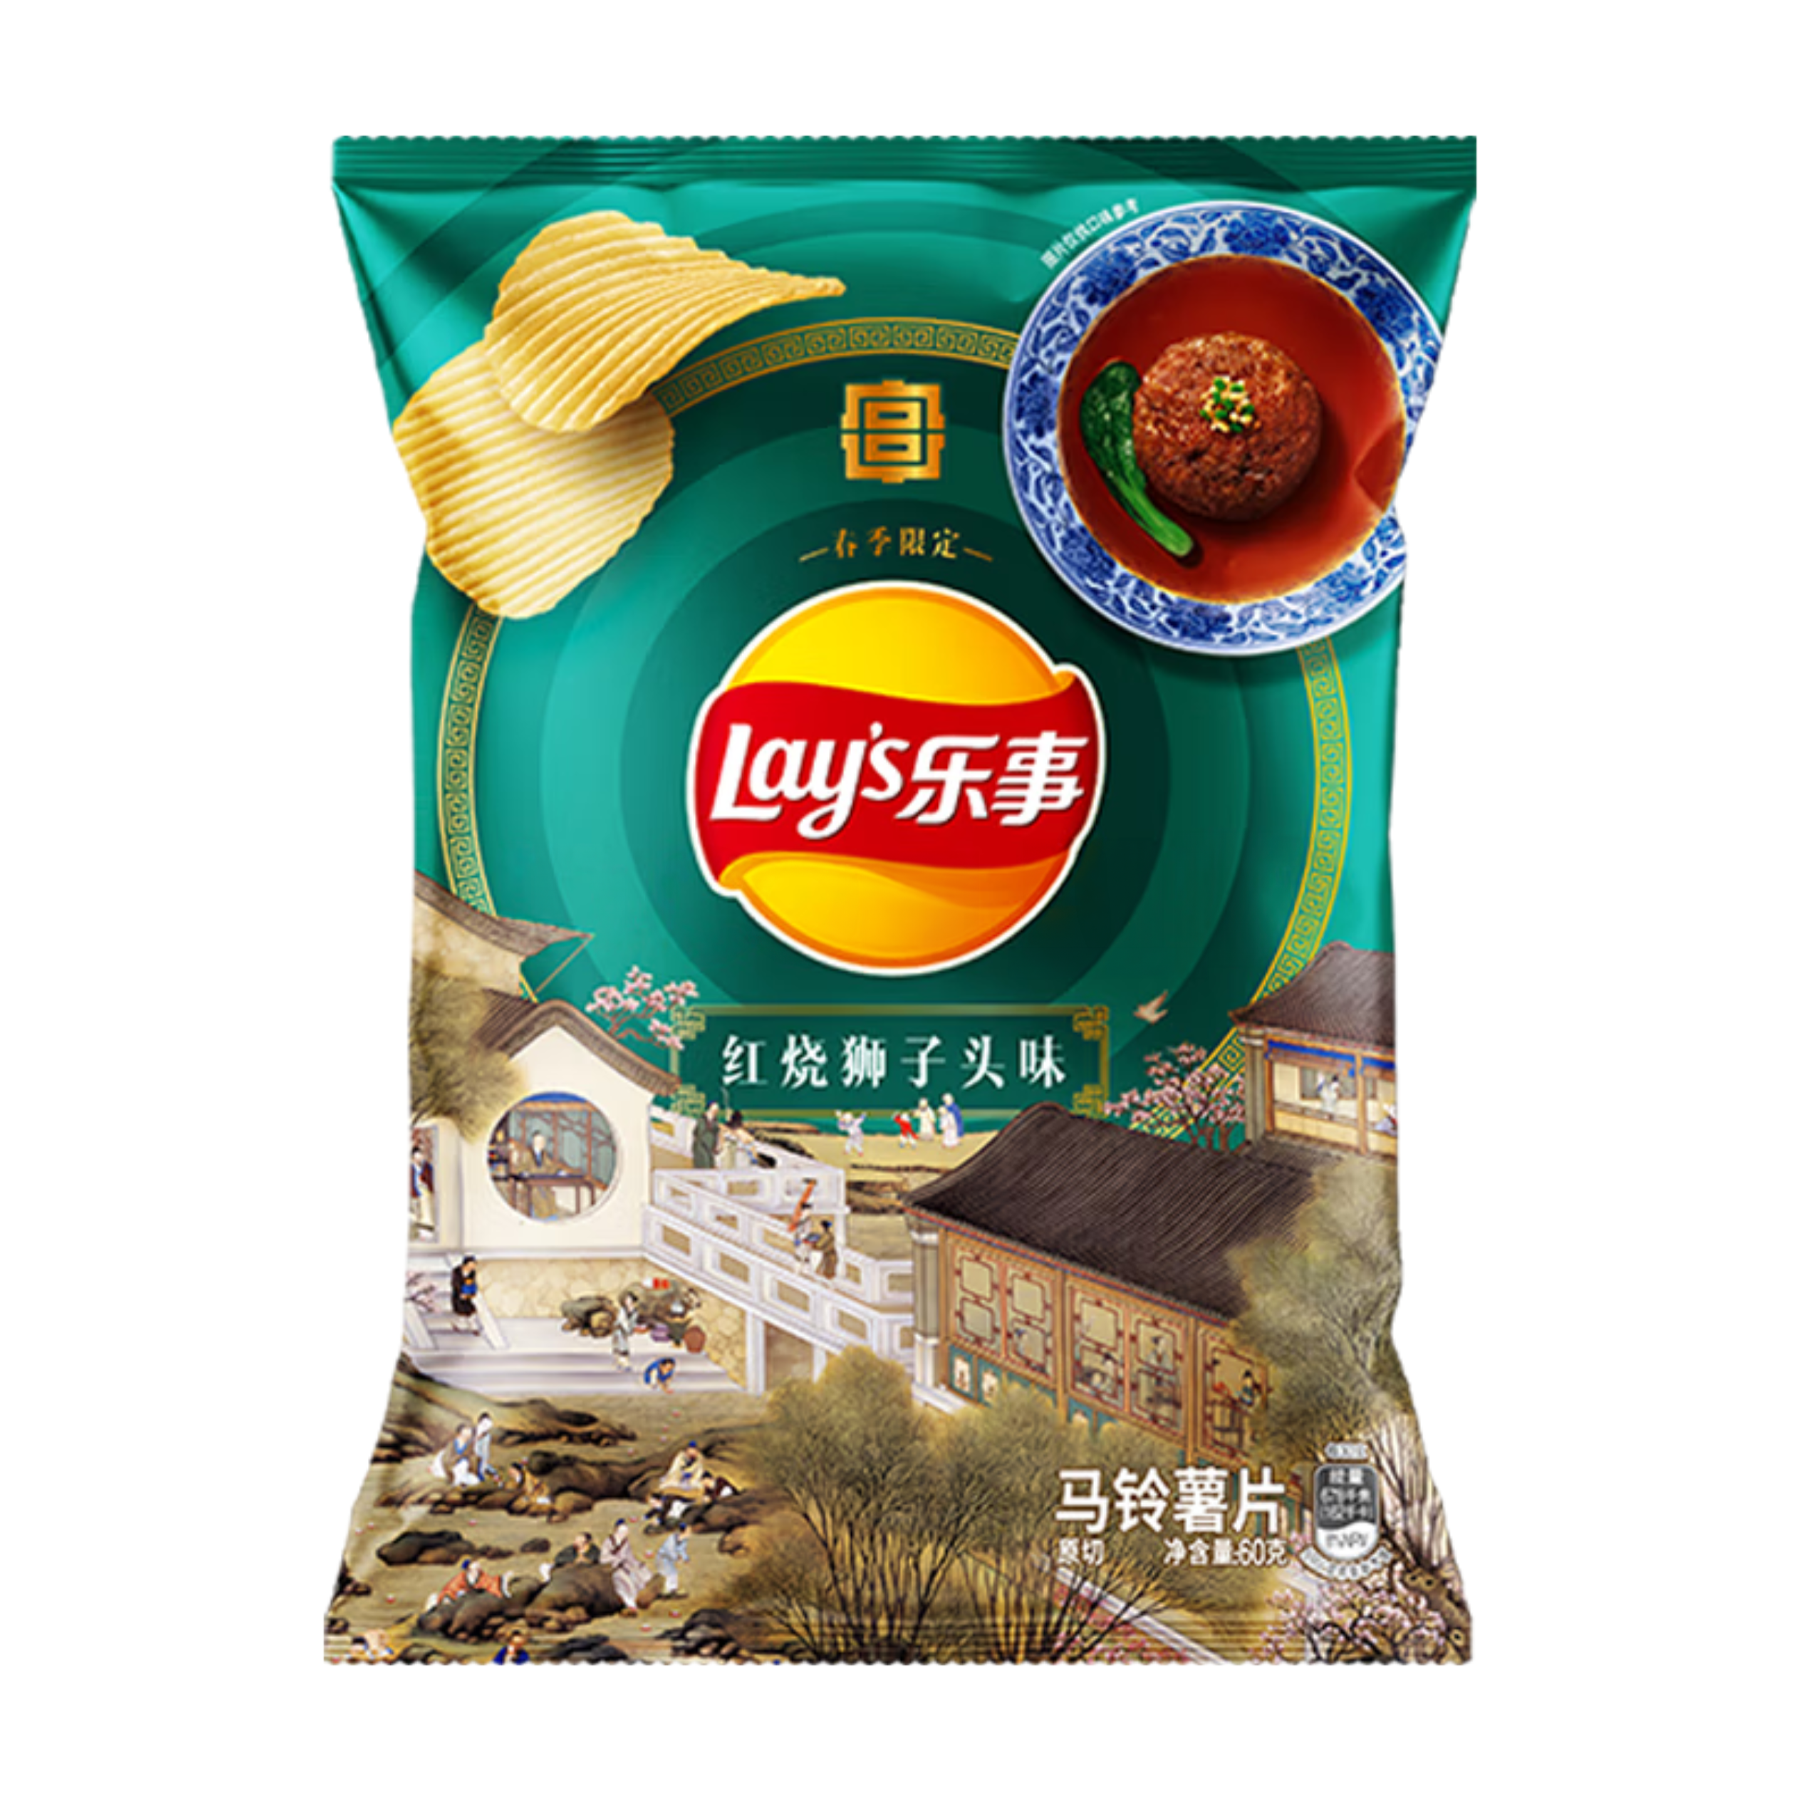 Lay's Braised Pork Meatball Flavored Chips